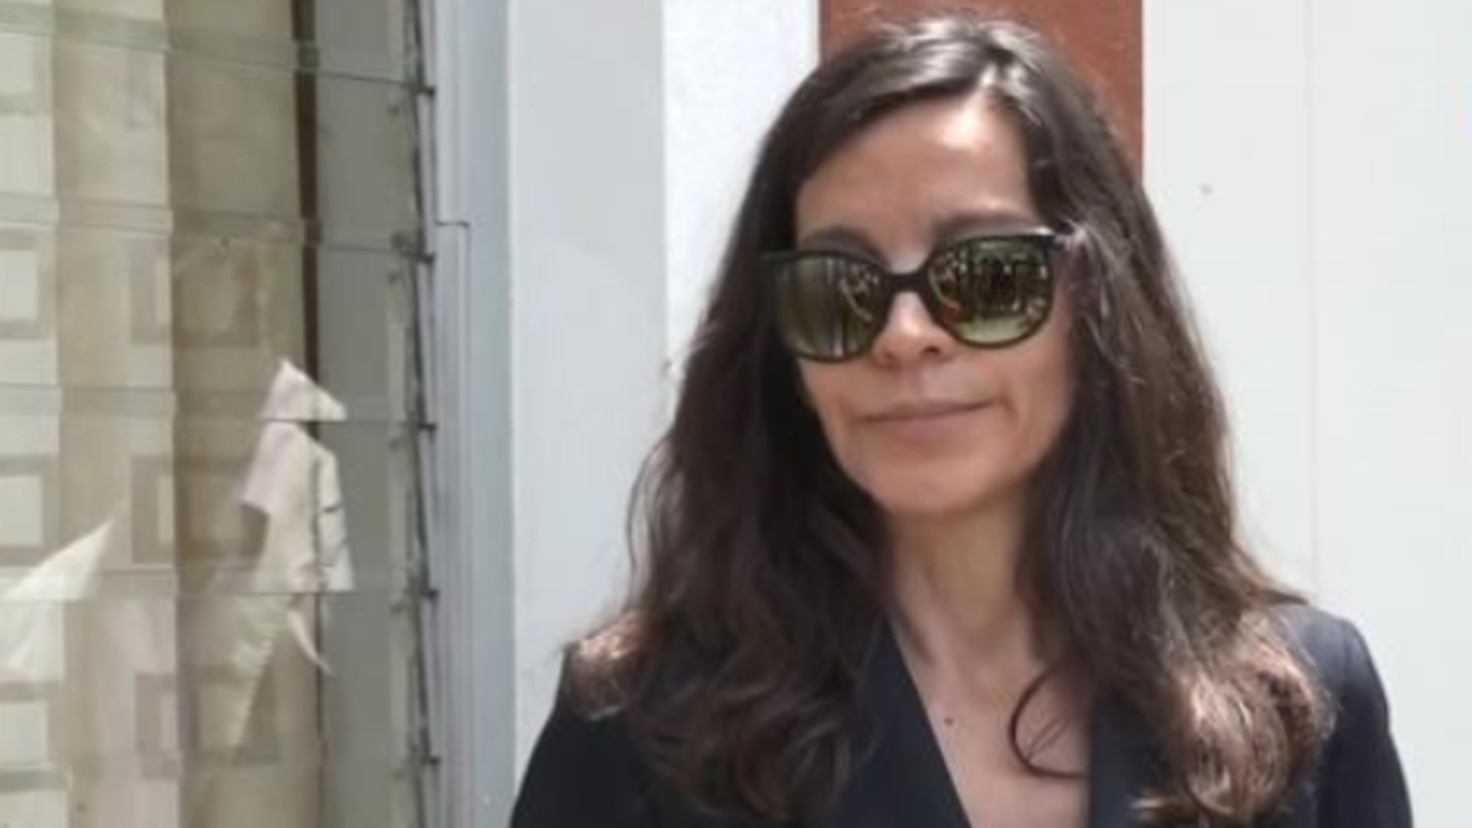 Silvia Bronchalo, after visiting her son Daniel Sancho: "It has been very difficult"
